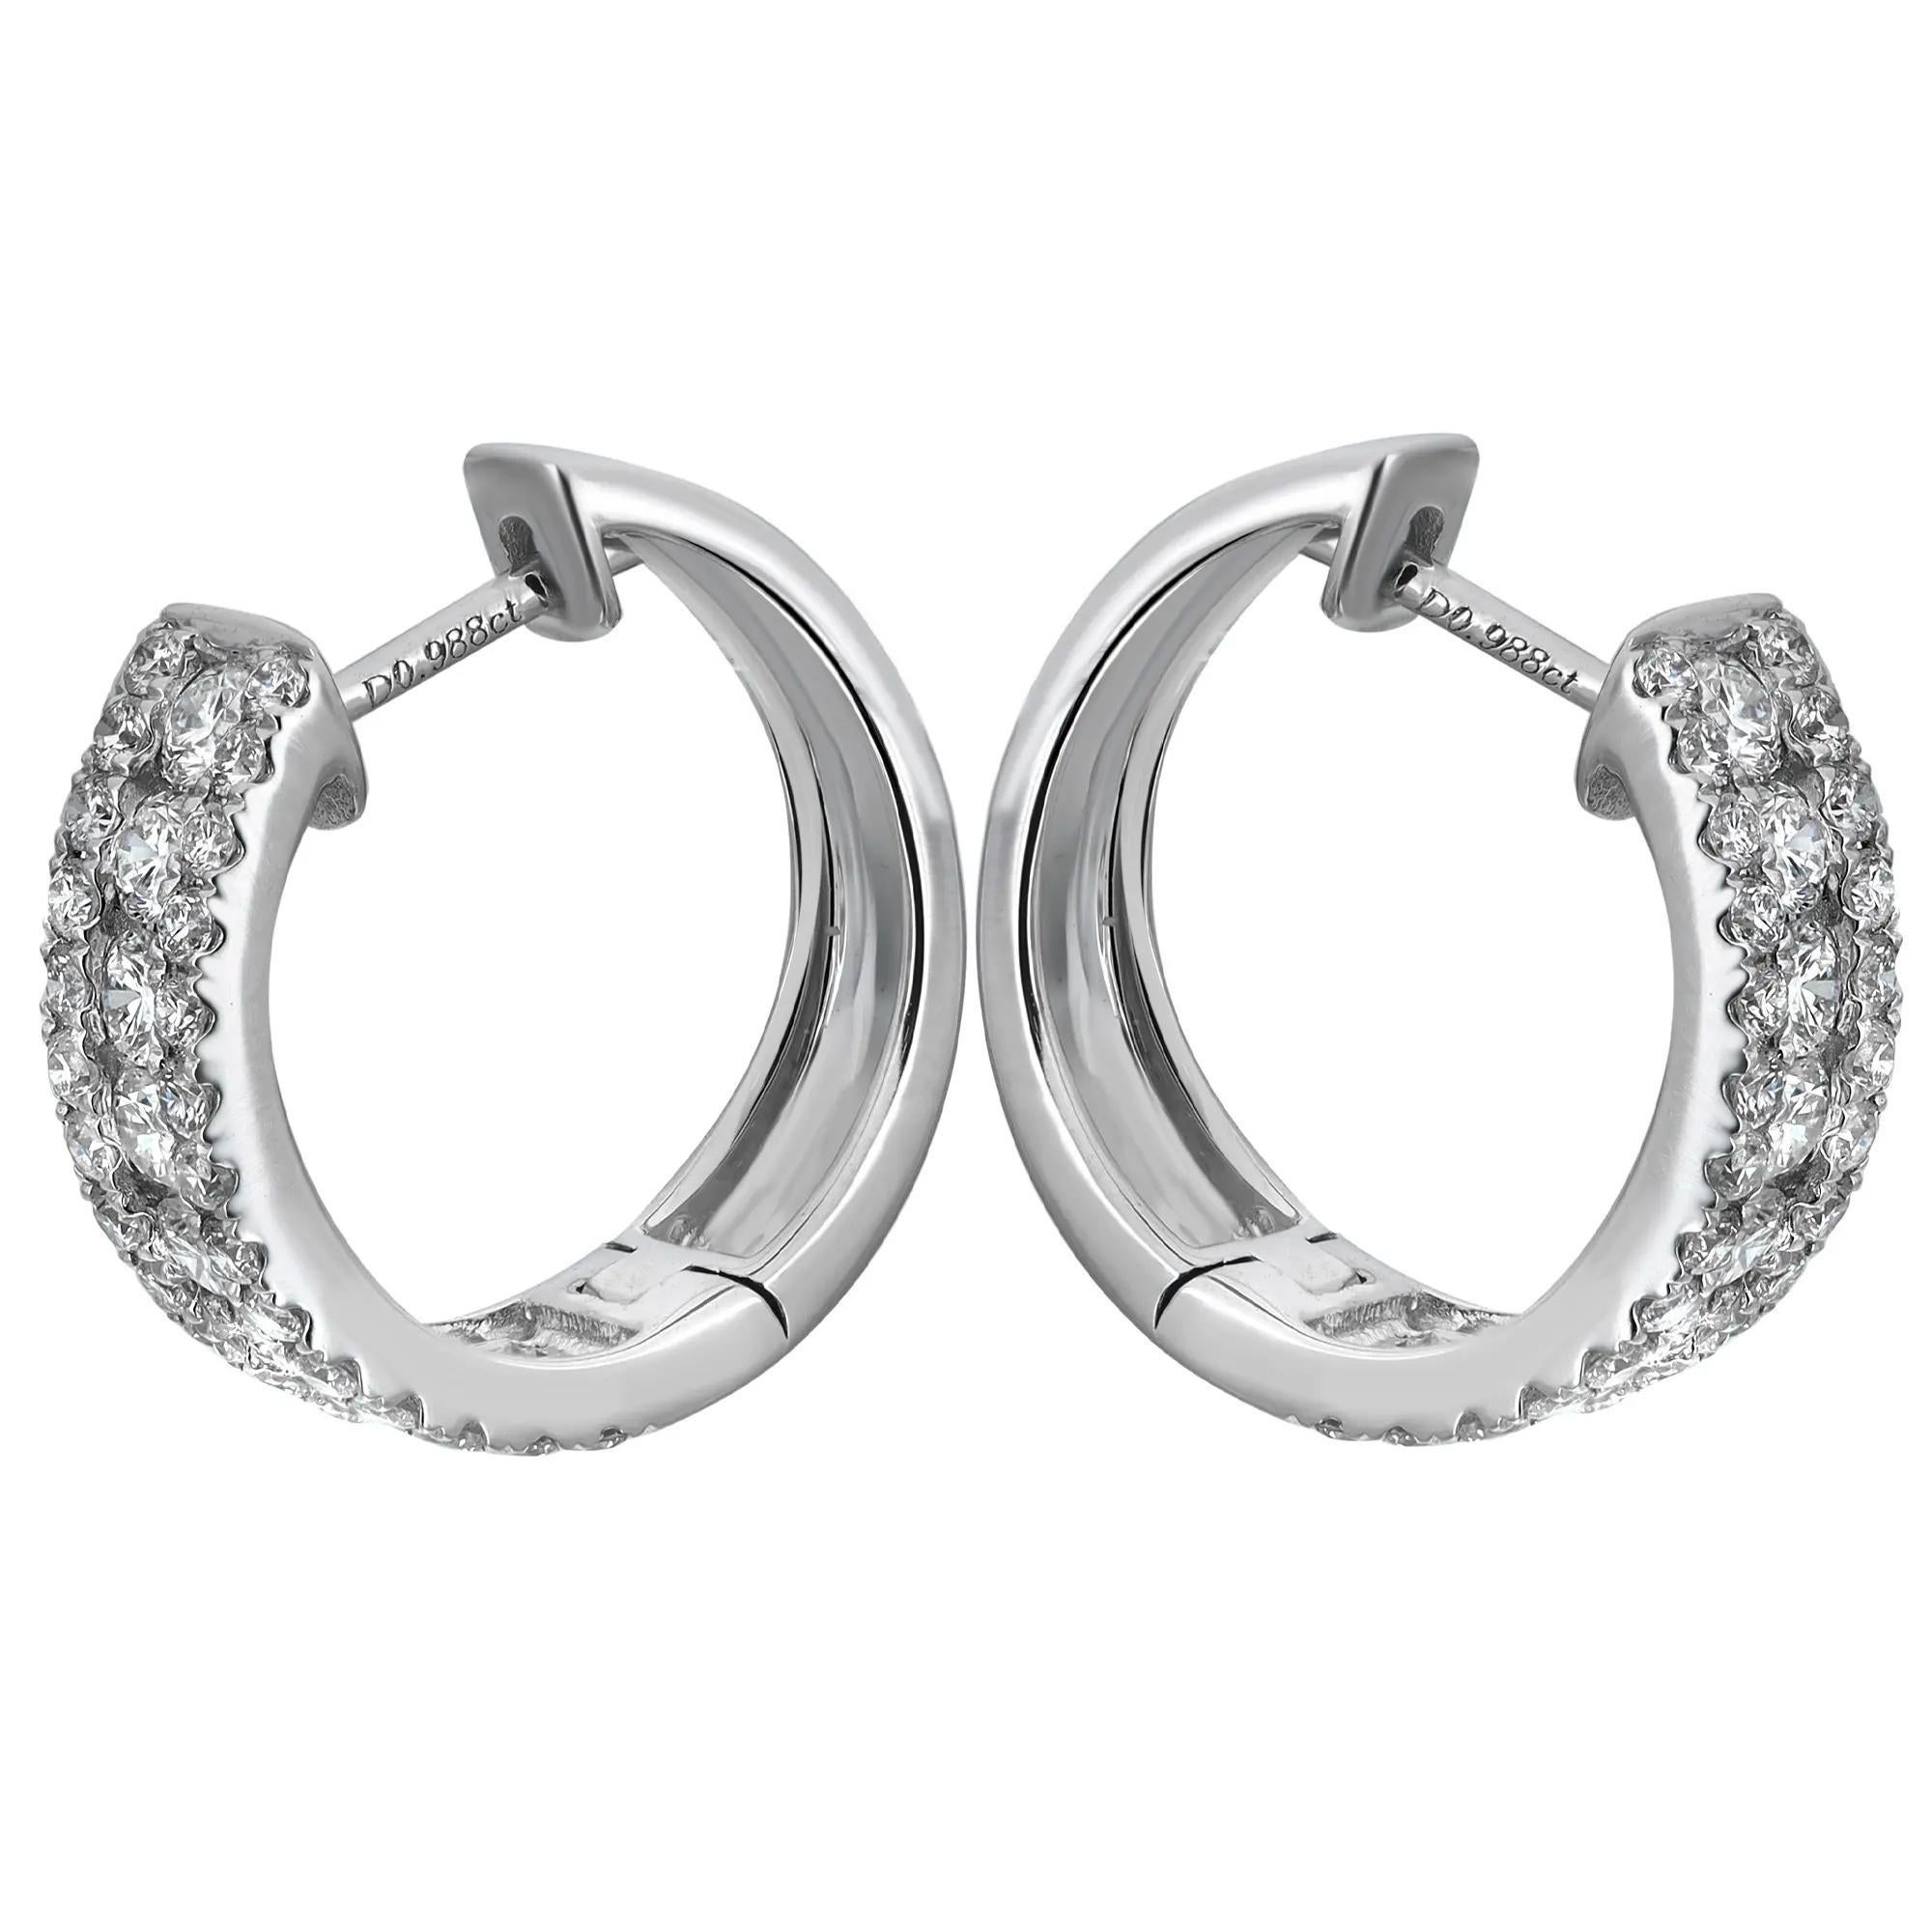 These glamorous diamond huggie earrings feature a center row of channel set dazzling round brilliant cut diamonds with prong set round cut diamonds. Total diamond weight: 1.10 carats. Encrusted in lustrous 18K white gold. Diamond quality: color G-H